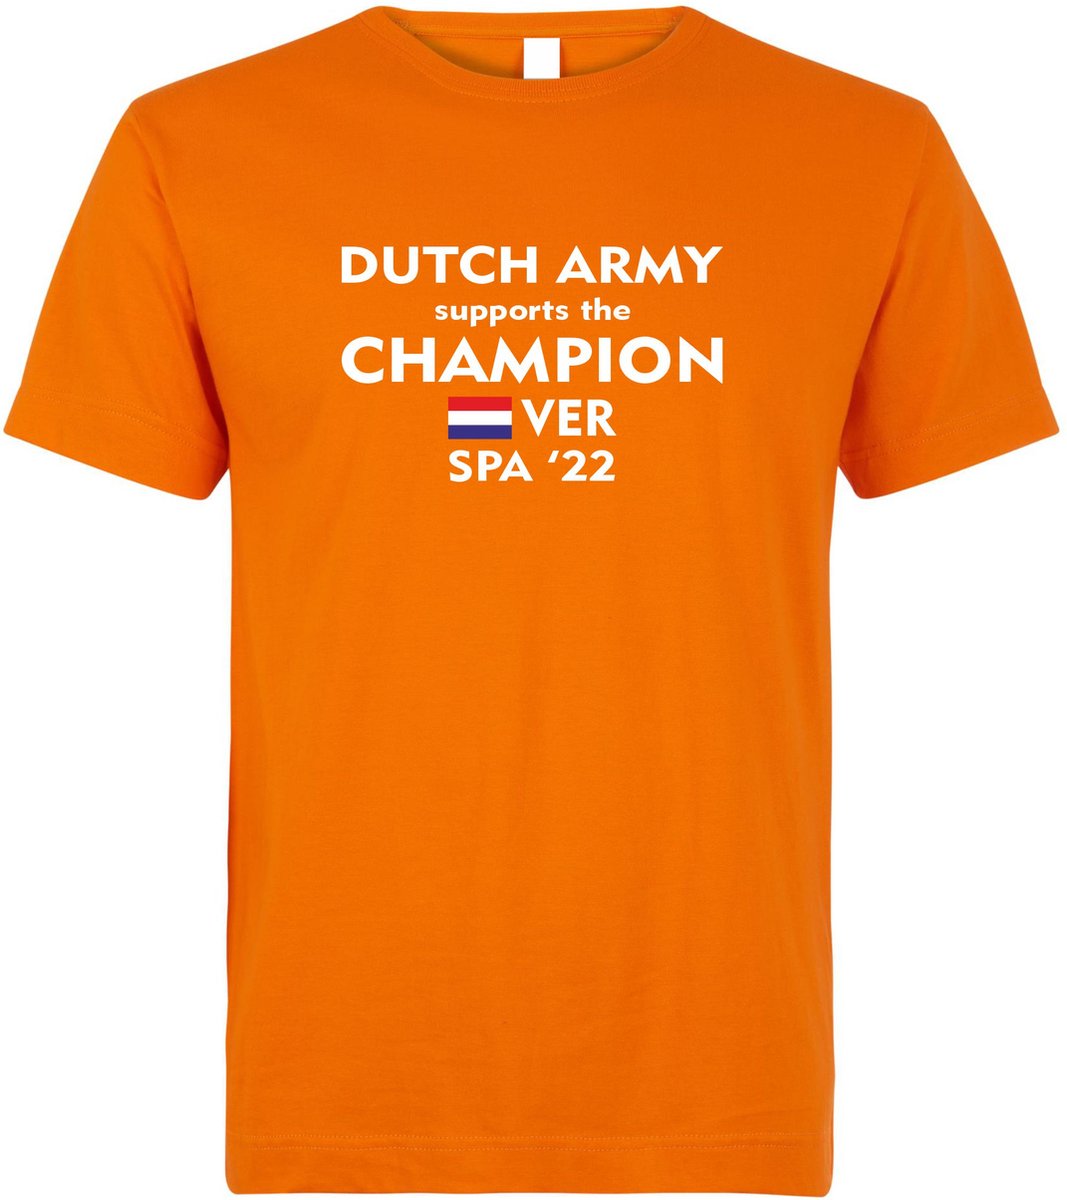 T-shirt Dutch Army supports the Champion Spa 22 | Max Verstappen / Red Bull Racing / Formule 1 fan | Grand Prix Circuit Spa-Francorchamps | kleding shirt | Oranje | maat XS